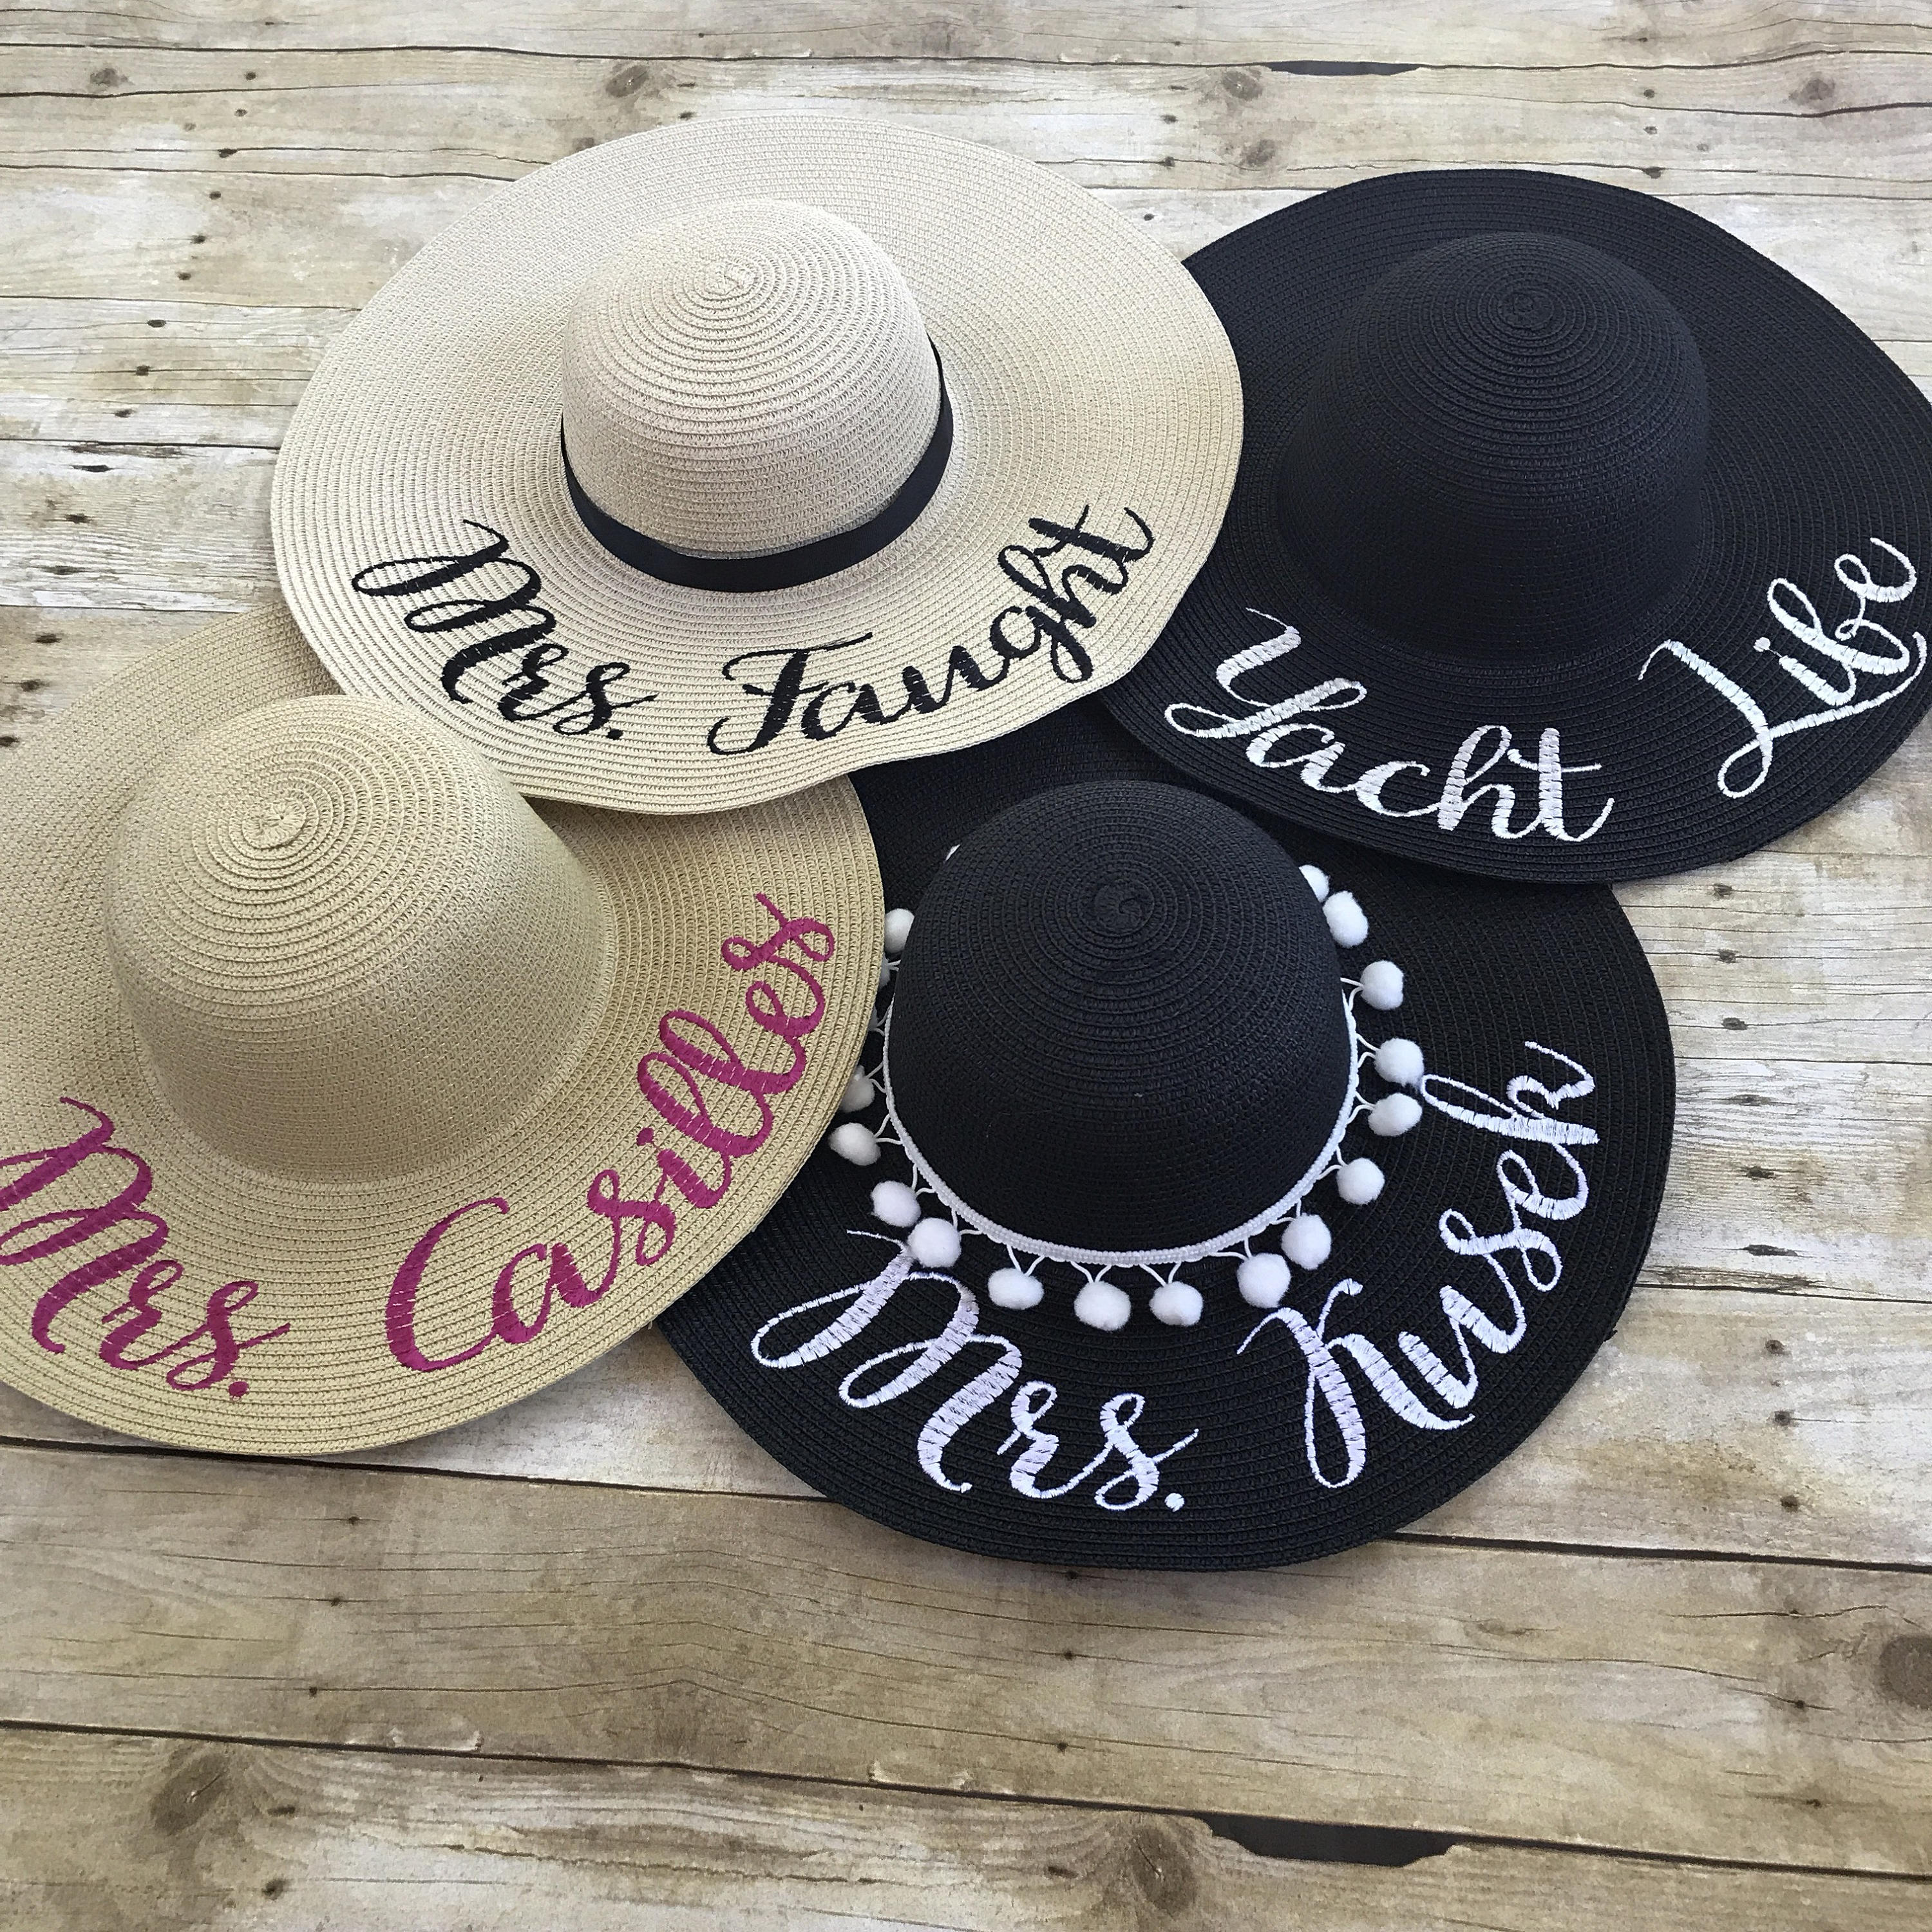 Personalized Floppy Beach Hat, Embroidered Sun Hat for Bride Bridesmaids, Custom Hat, Beach Hat, Honeymoon, Gift for Bride, Bridal Shower